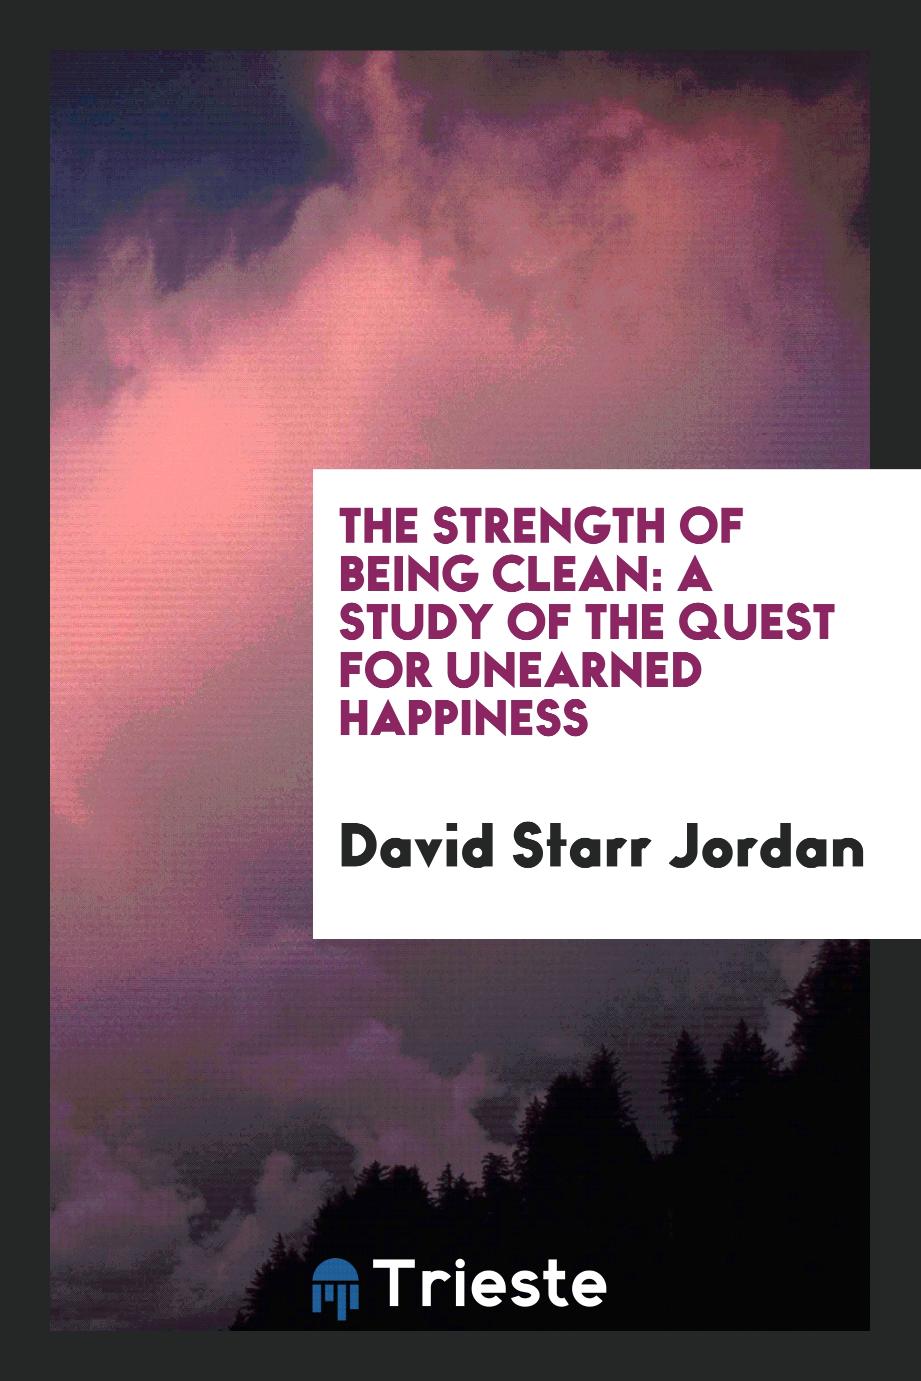 The Strength of Being Clean: A Study of the Quest for Unearned Happiness